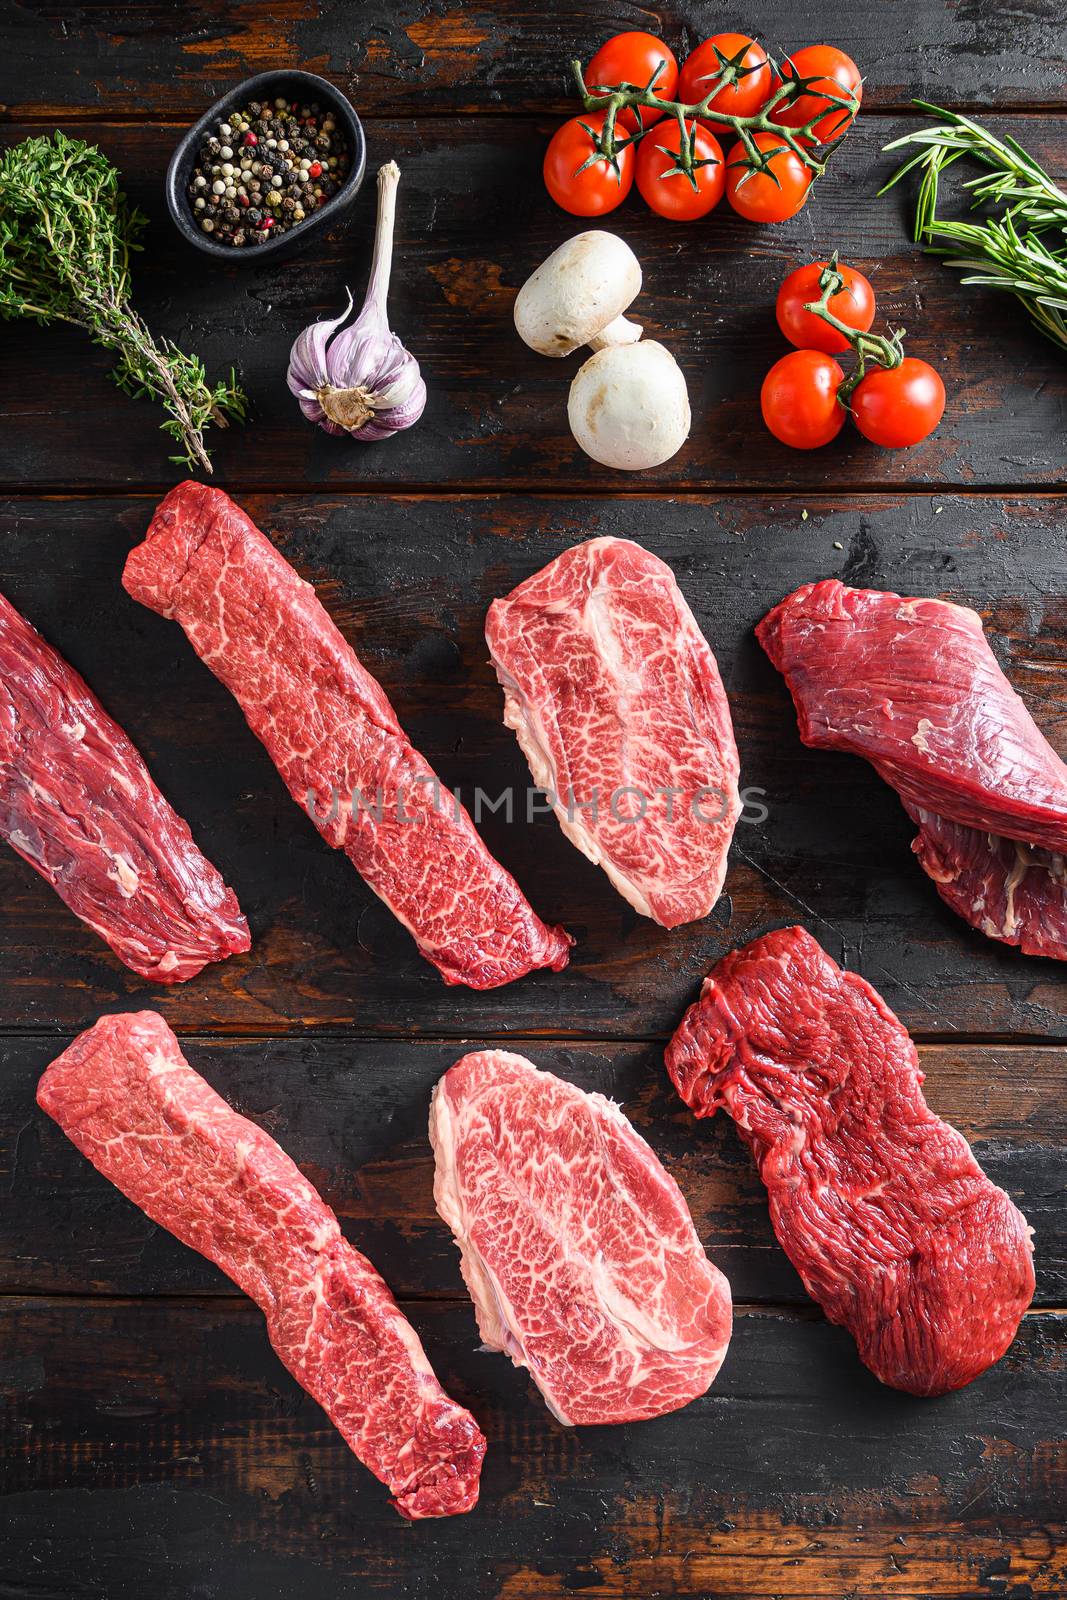 A set of different types of raw beef steaks alternative cut flap flank Steak, machete steak or skirt cut, Top blade or flat iron beef and tri tip, triangle roast with denver cut with fresh organic herbs over wood background top view vertical by Ilianesolenyi